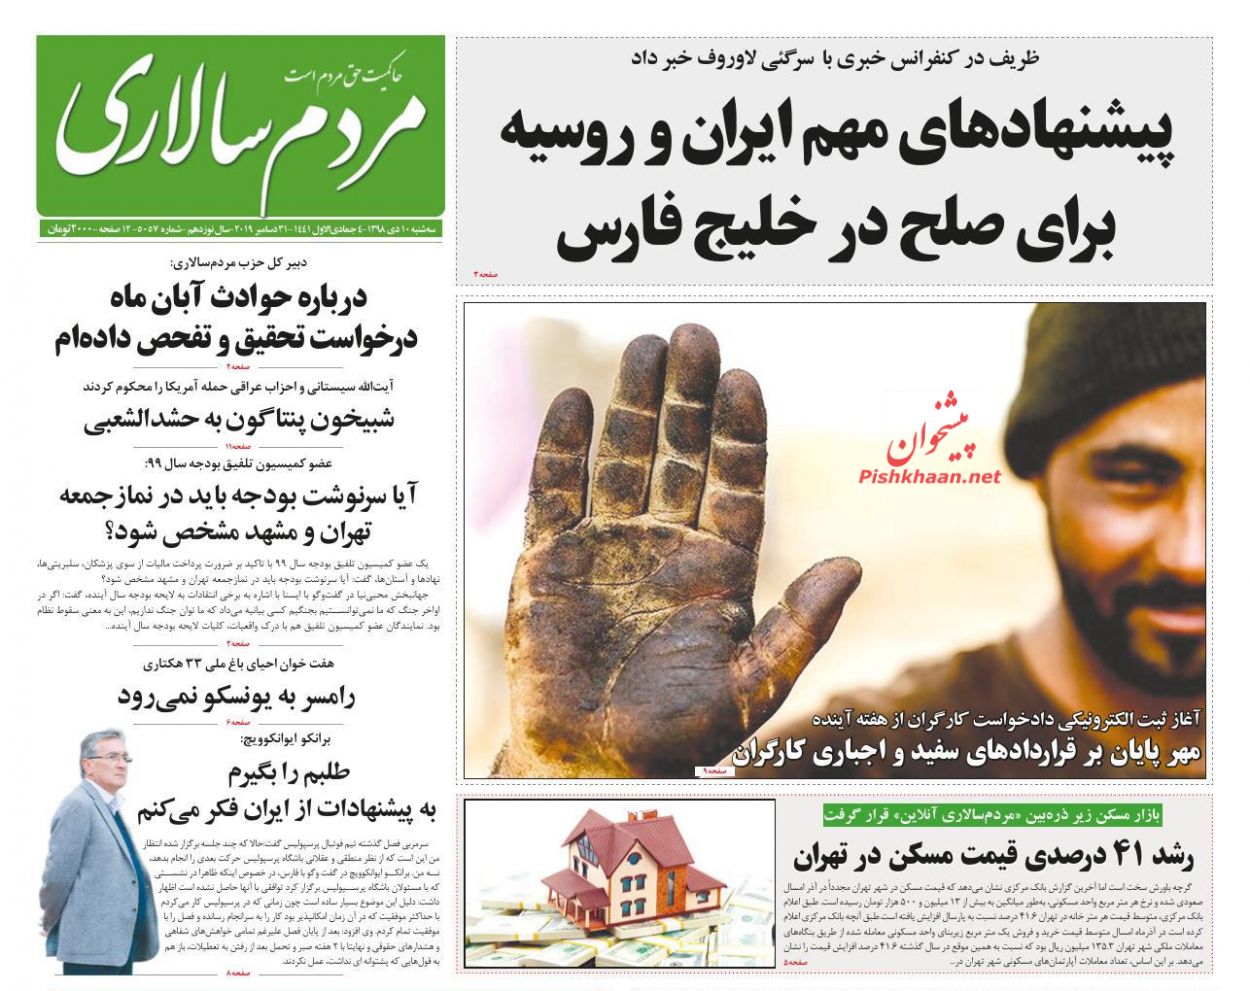 A Look at Iranian Newspaper Front Pages on December 31